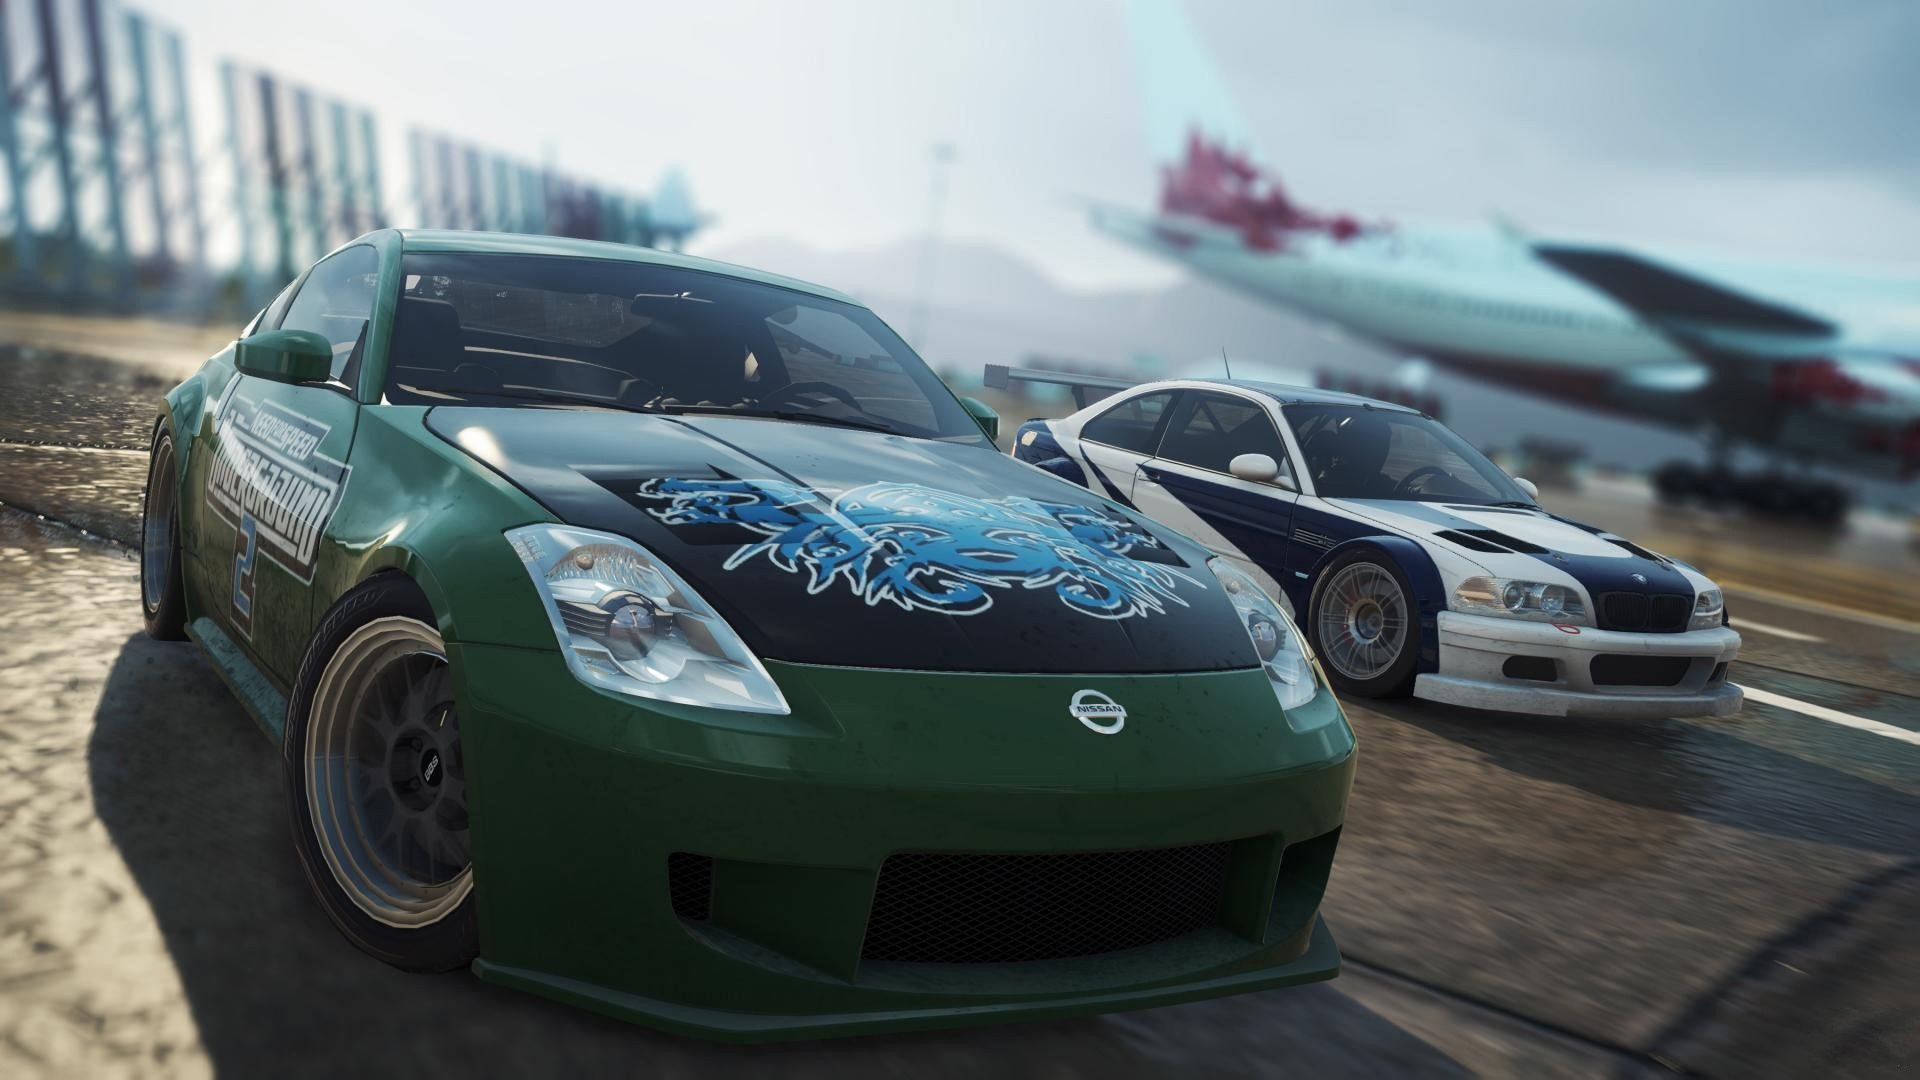 Awesome Need For Speed: Most Wanted free wallpaper ID:137072 for full hd 1920x1080 desktop